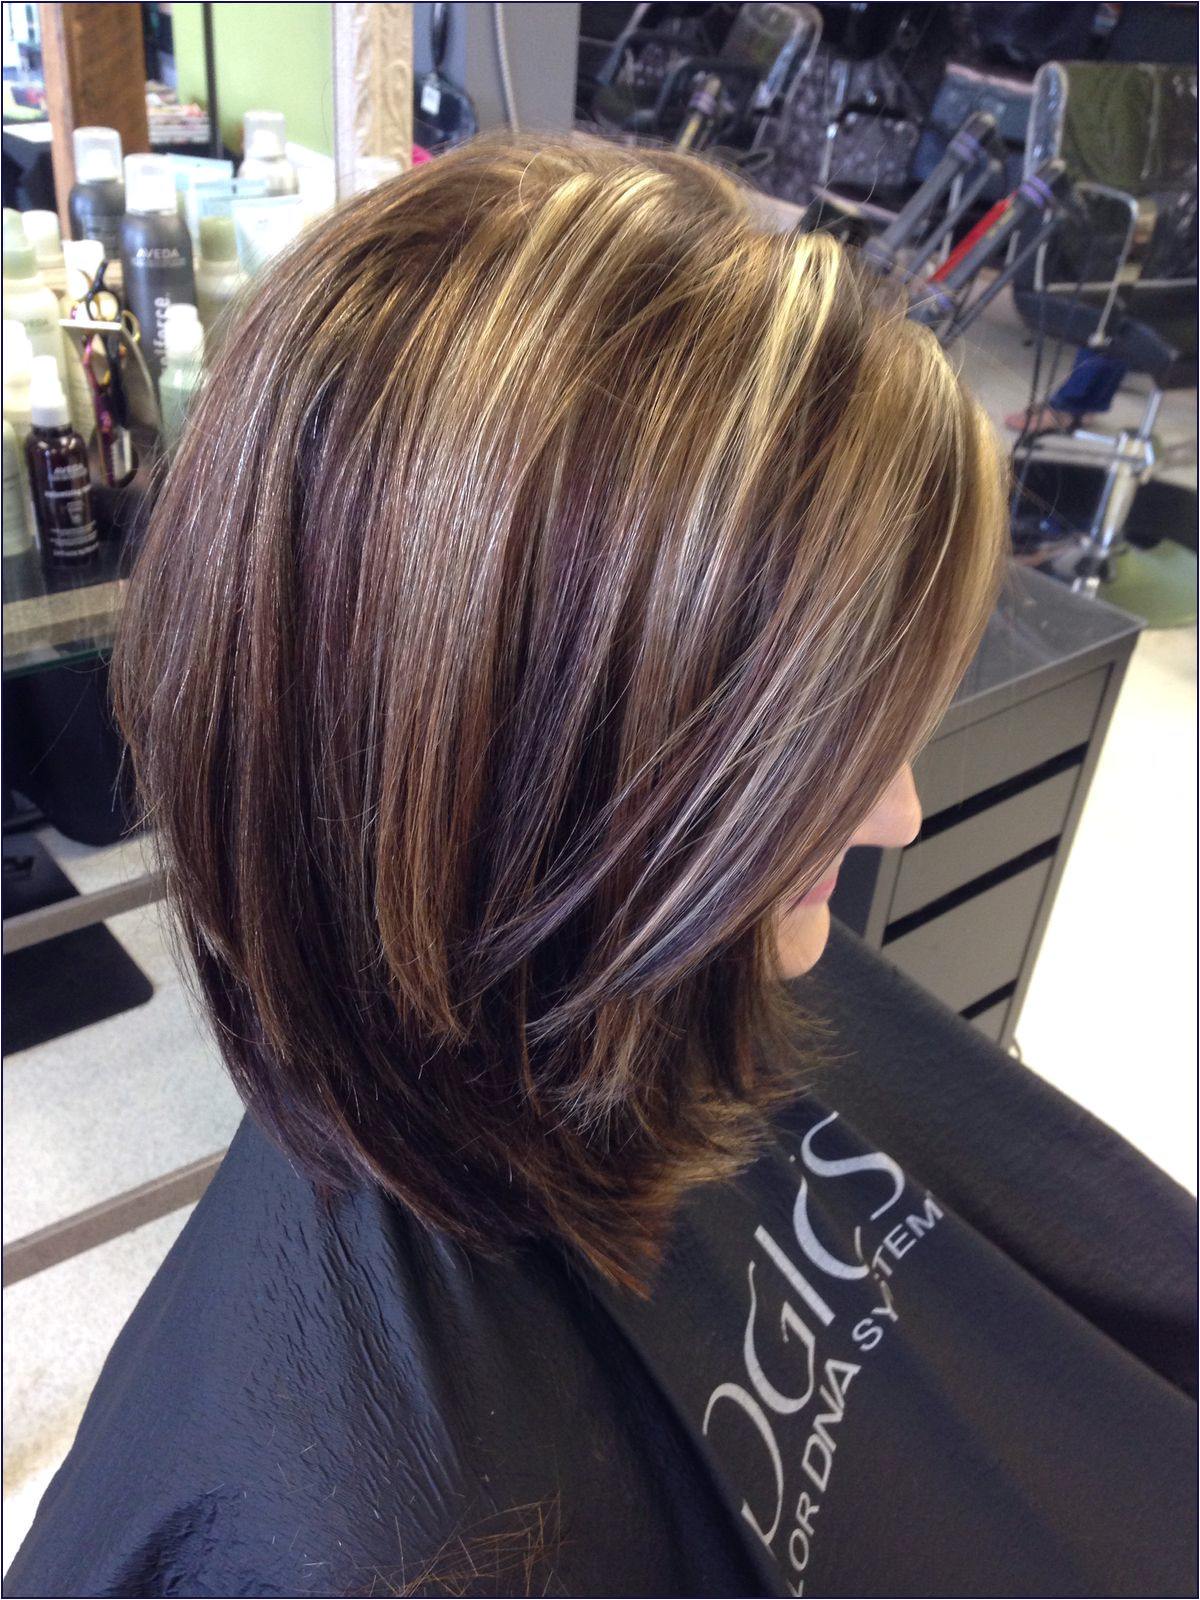 Hairstyles With Highlights And Lowlights Inspirational I Pinimg 1200x 0d 60 8a 0d608a58a4bb3ed3b A